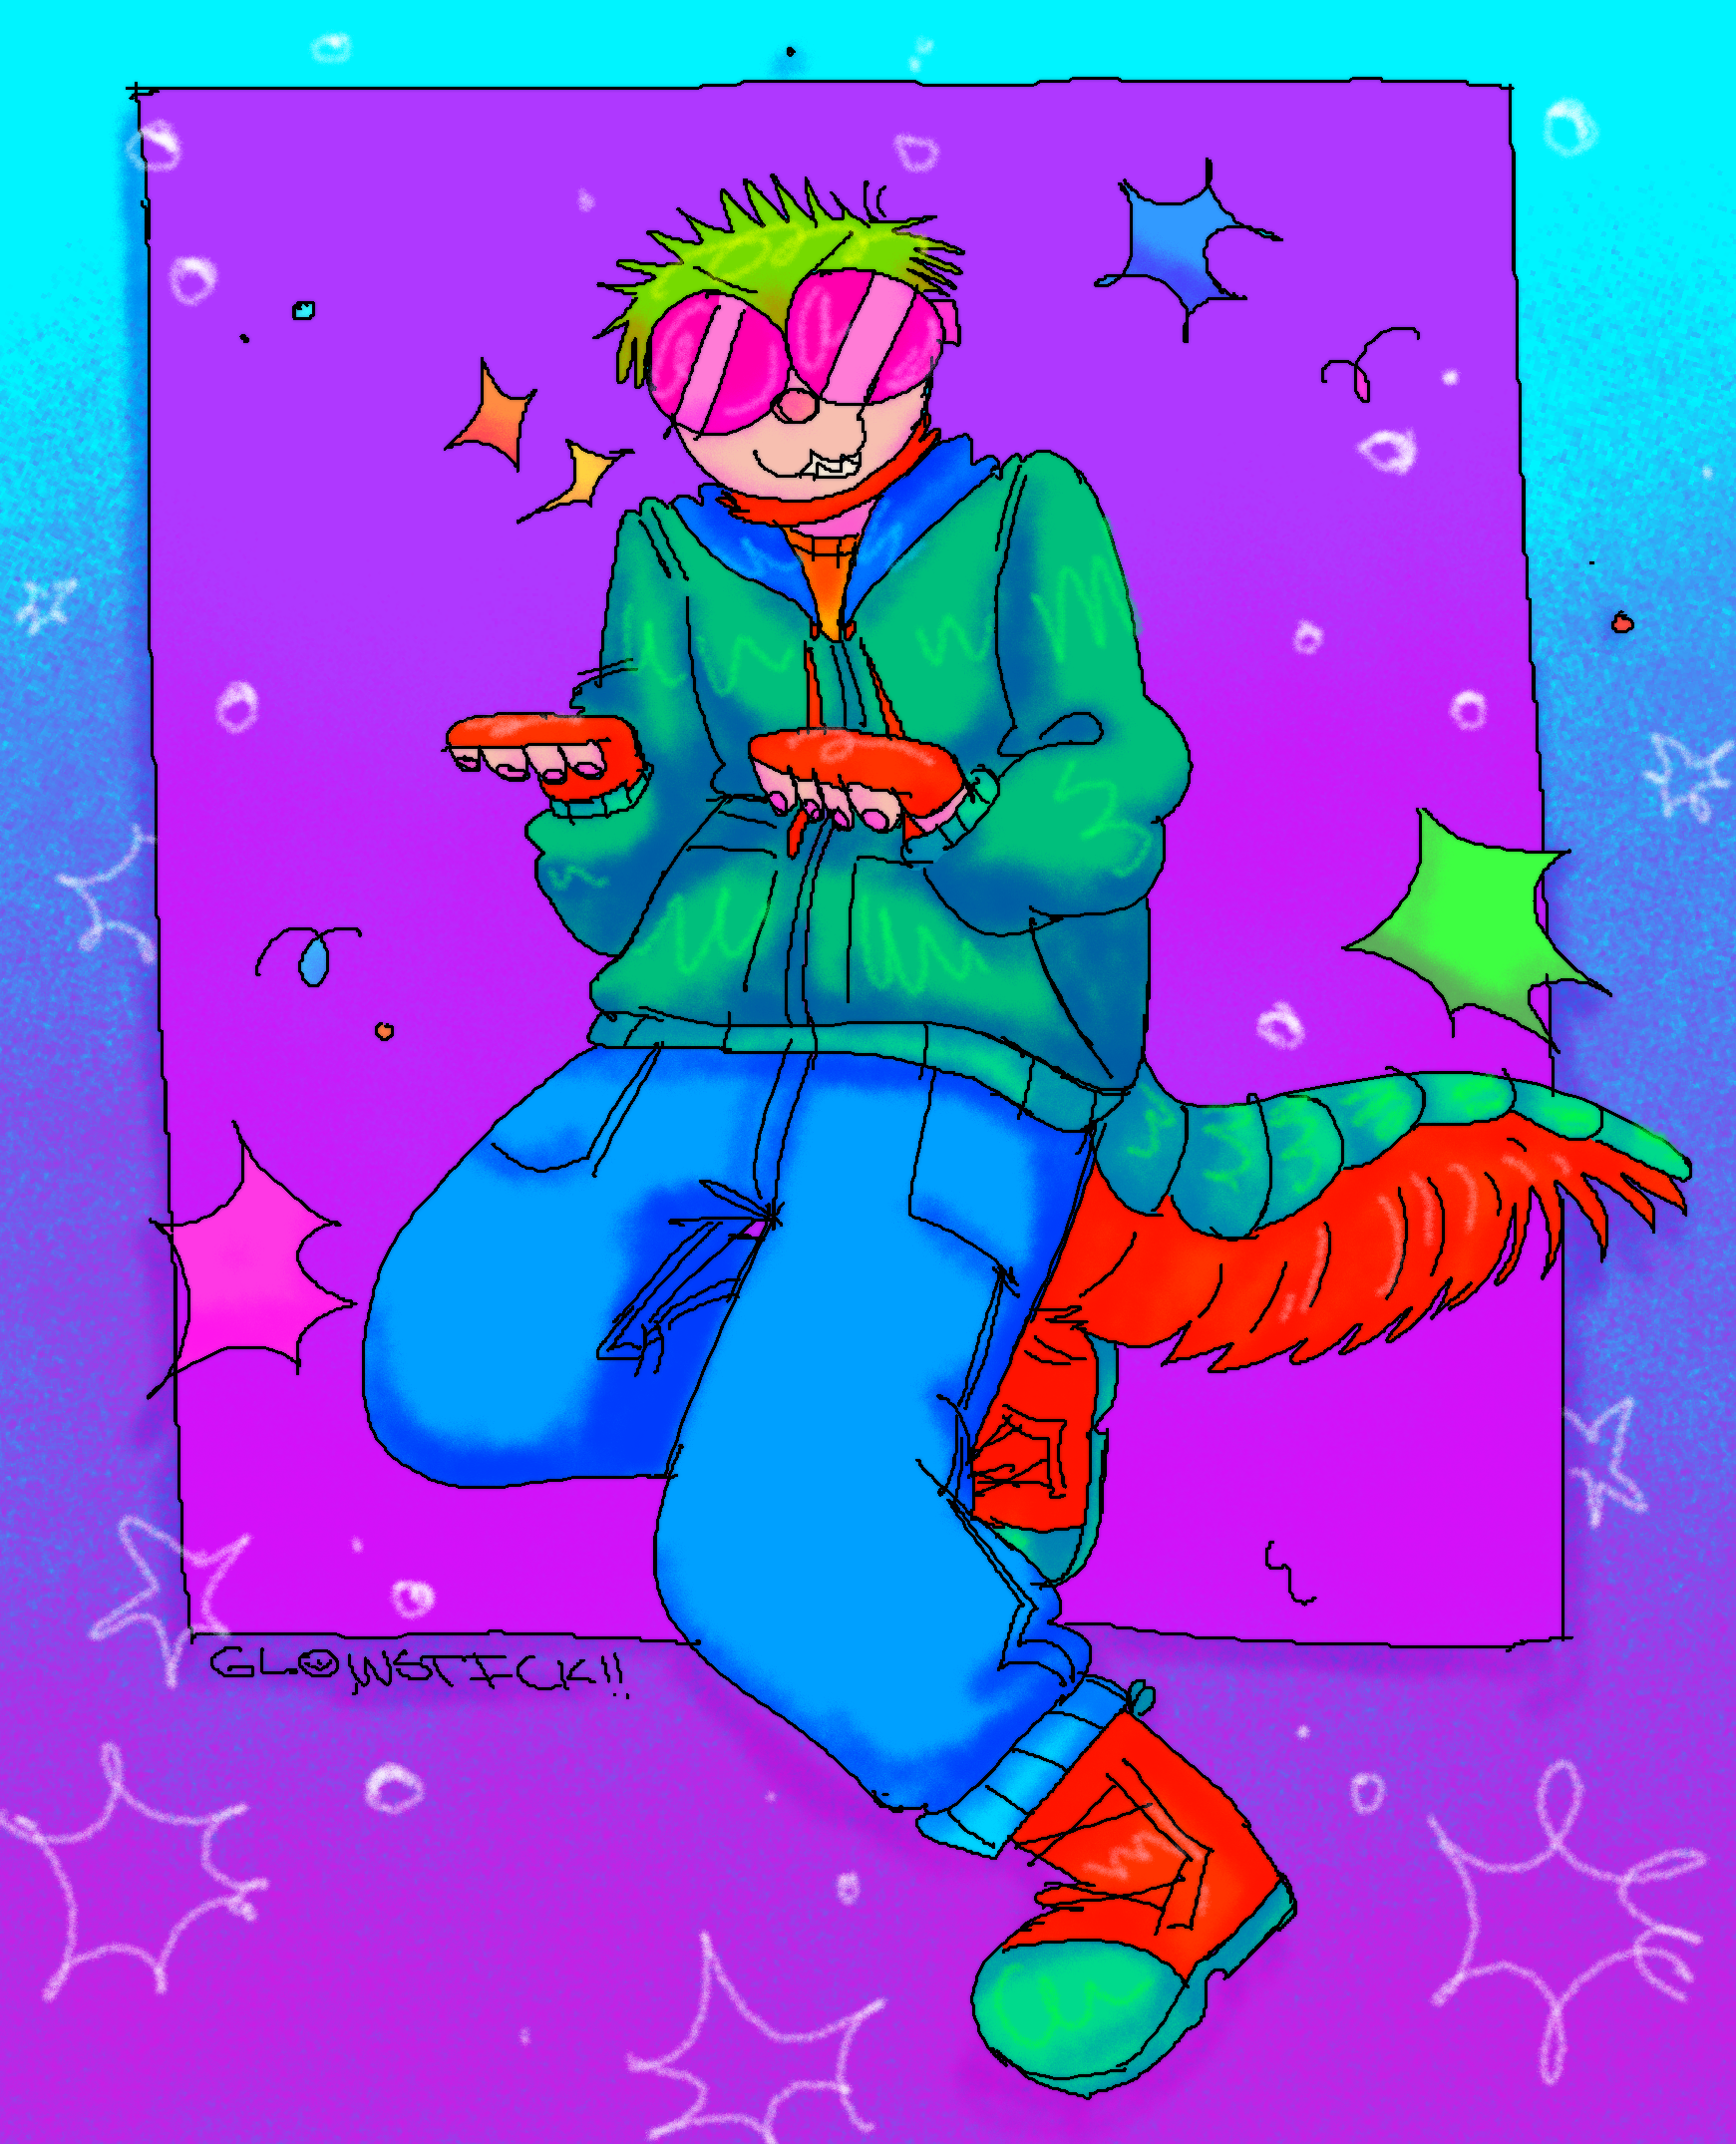 A digital drawing of Crevette, a lightskinned person with green hair and pink goggles. They have a green and red shrimp tail, and are wearing a green jacket with red fingerless gloves. They are posed like a cartoon burgler about to rob a bank.